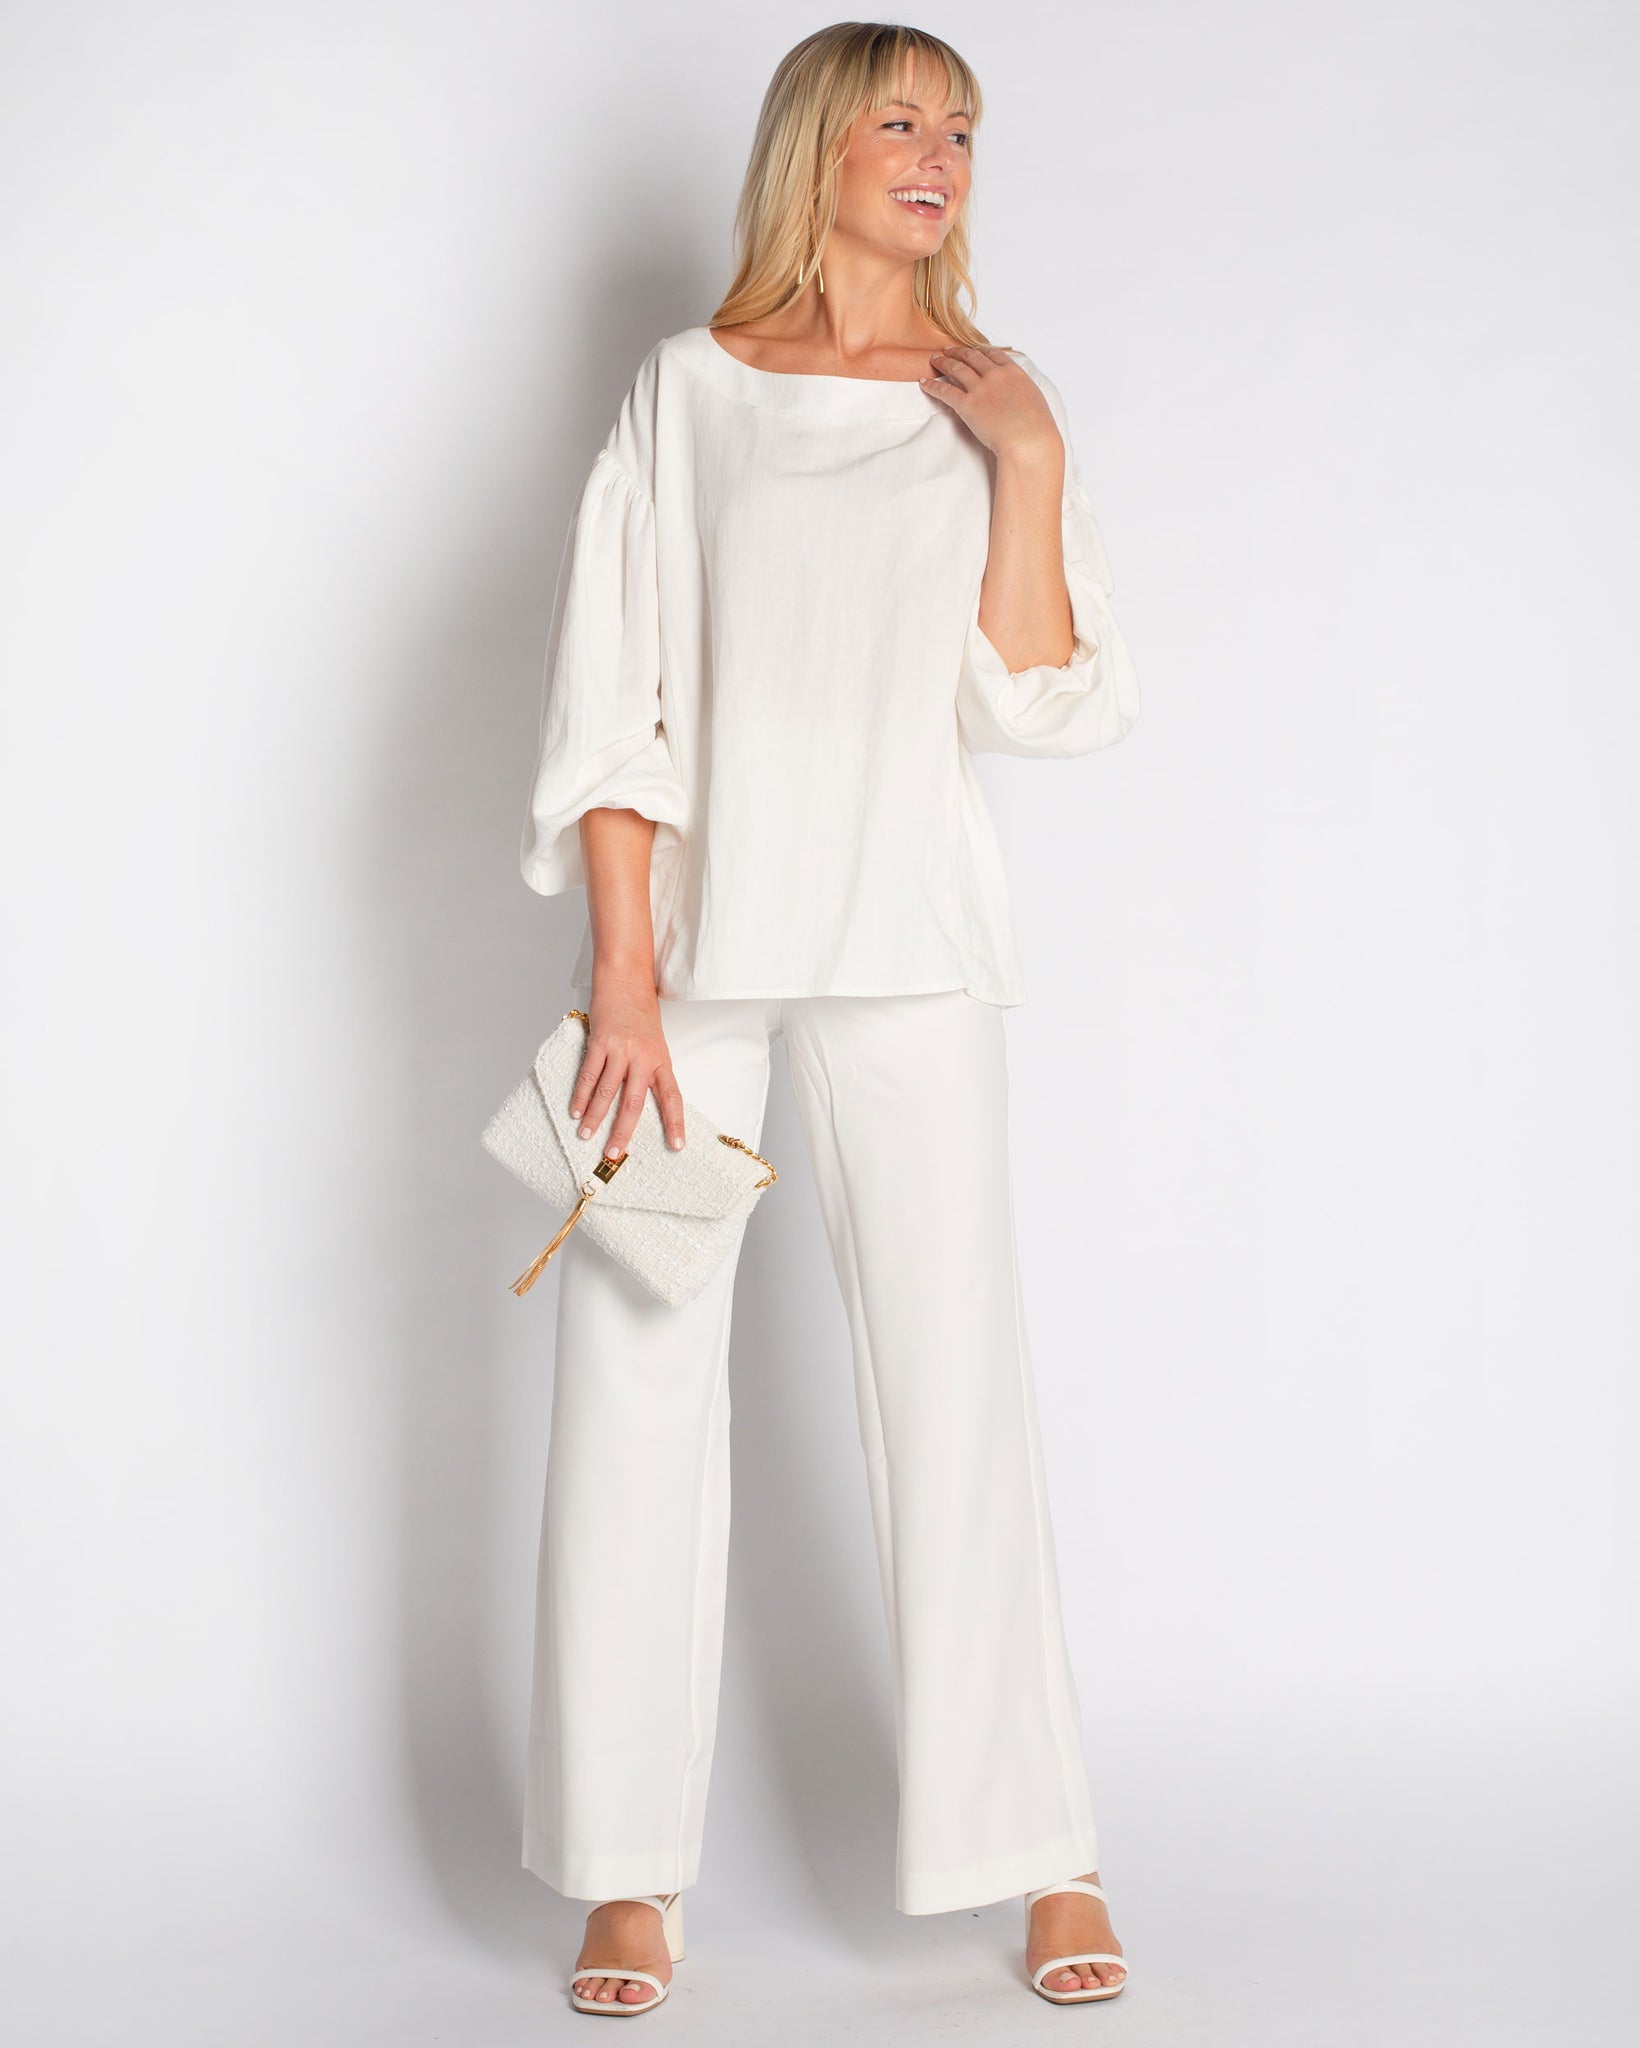 The Jewel Blouse in Linen- SALE